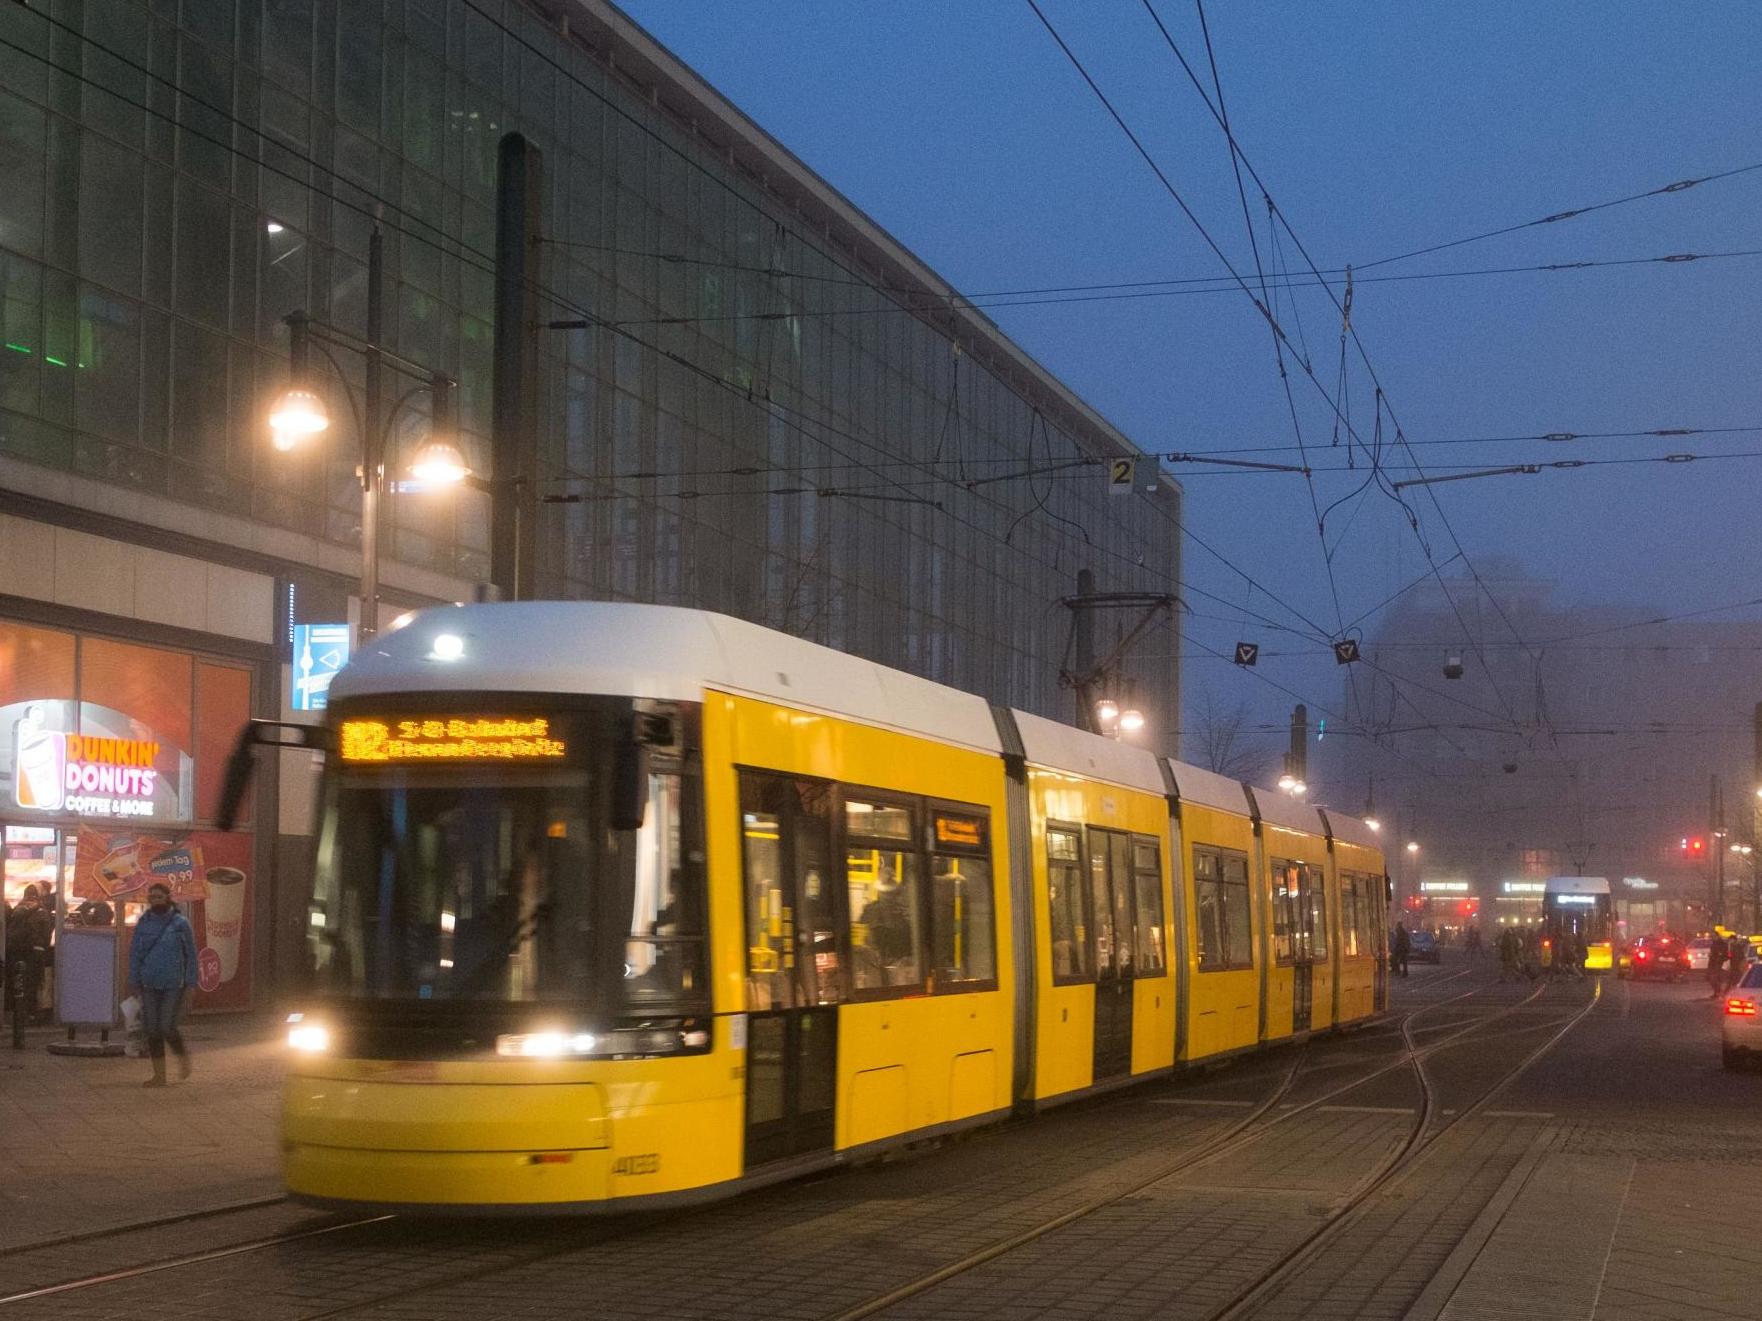 Police said they received calls from frightened passengers on a tram speeding towards the German city of Bonn on Sunday